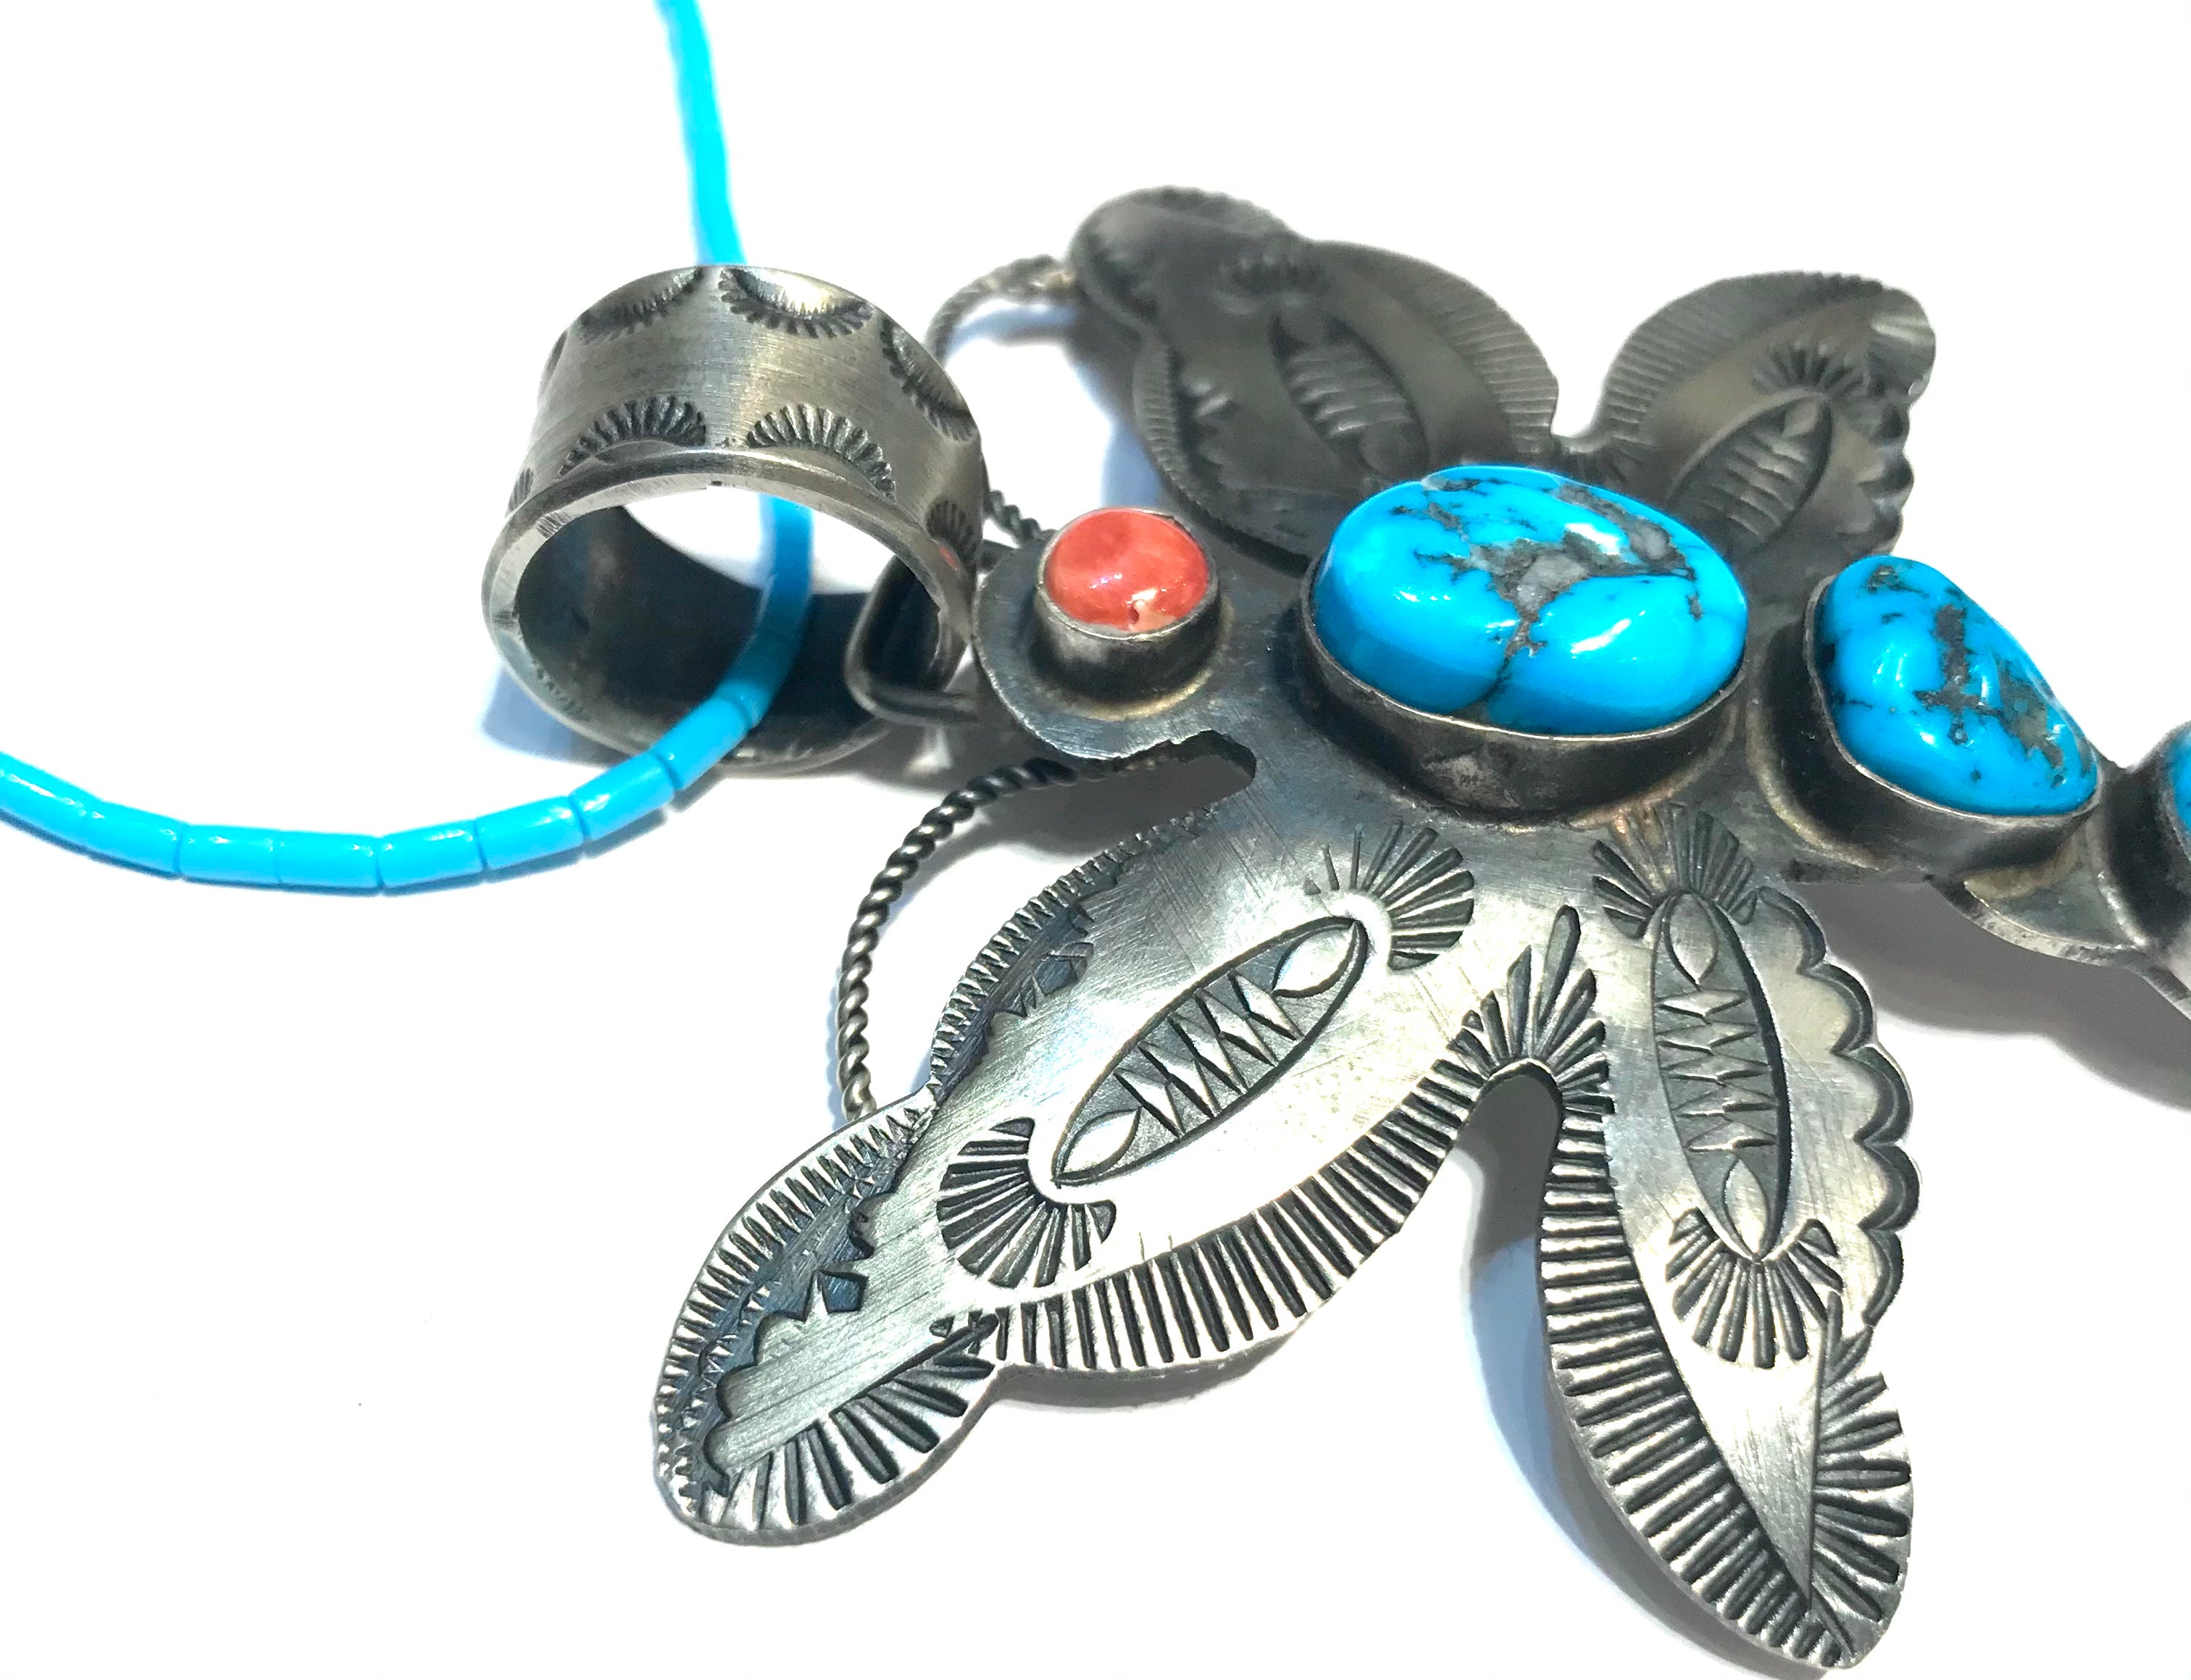 Dragonfly Navajo. pendent / necklace